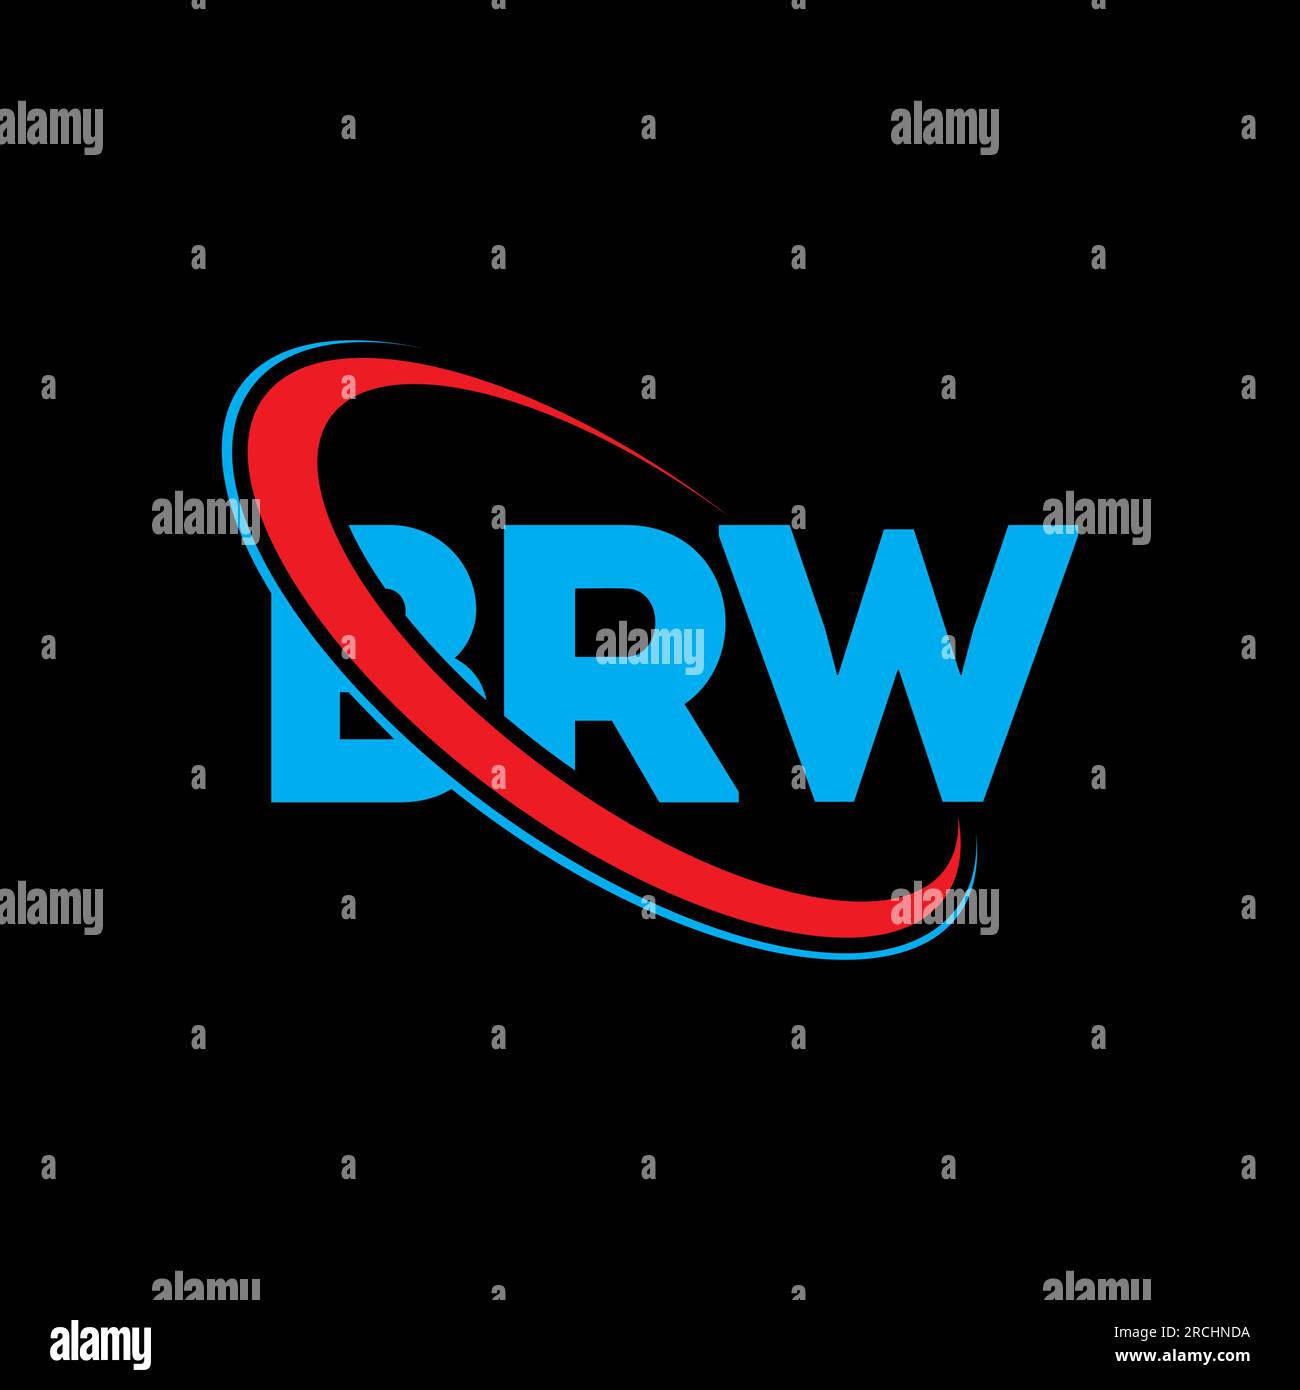 BRW logo. BRW letter. BRW letter logo design. Initials BRW logo linked with circle and uppercase monogram logo. BRW typography for technology, busines Stock Vector